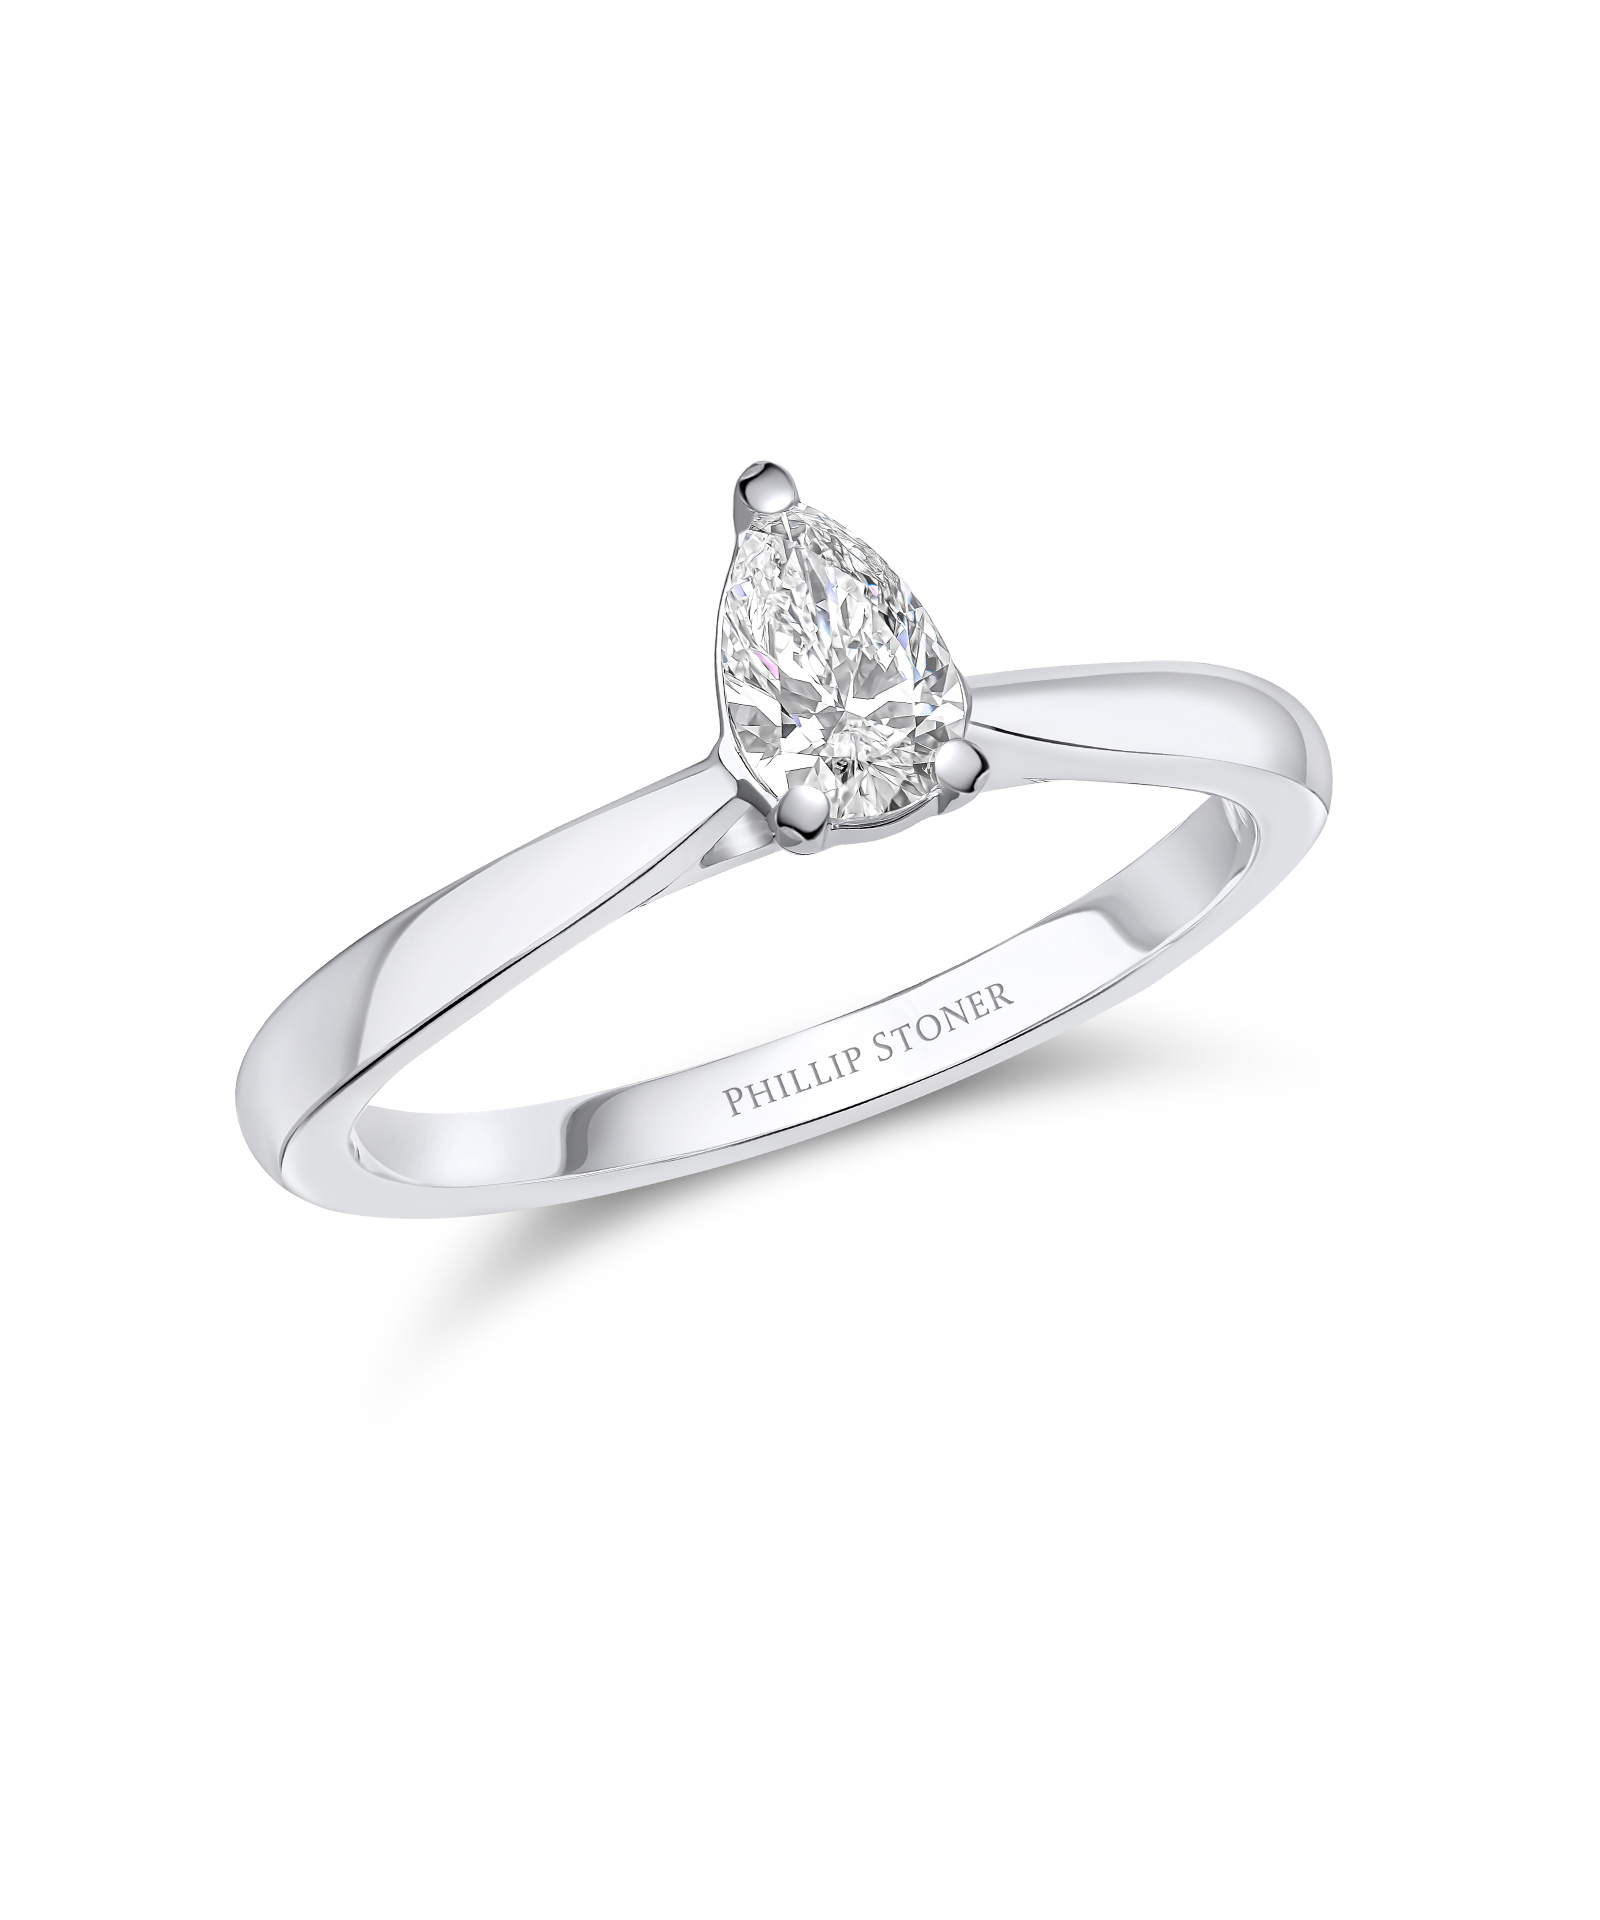 0.35ct Pear Cut Diamond Solitaire Engagment Ring - Phillip Stoner The Jeweller